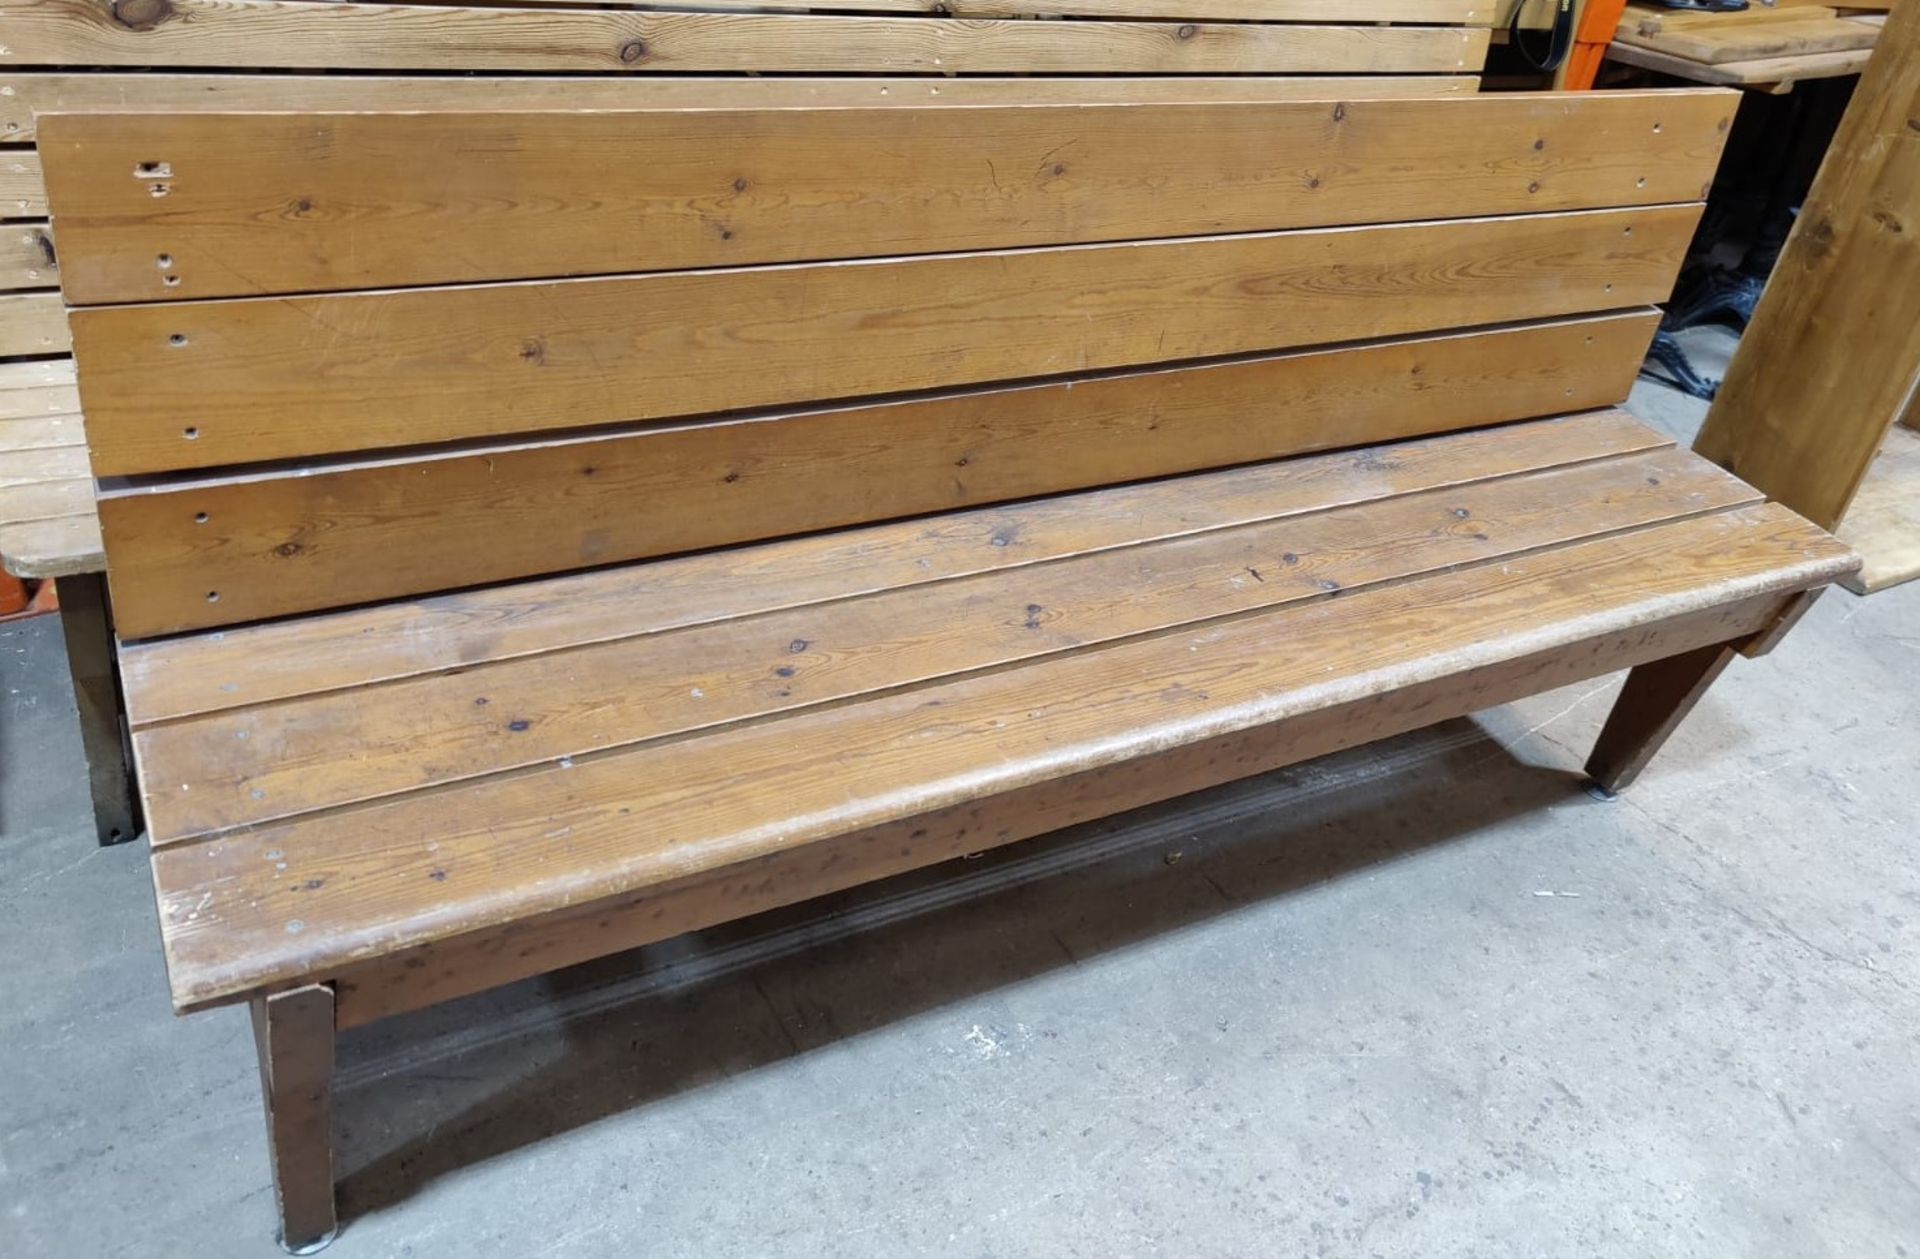 1 x Rustic Restaurant Seating Bench - Recently Removed From a Restaurant Environment